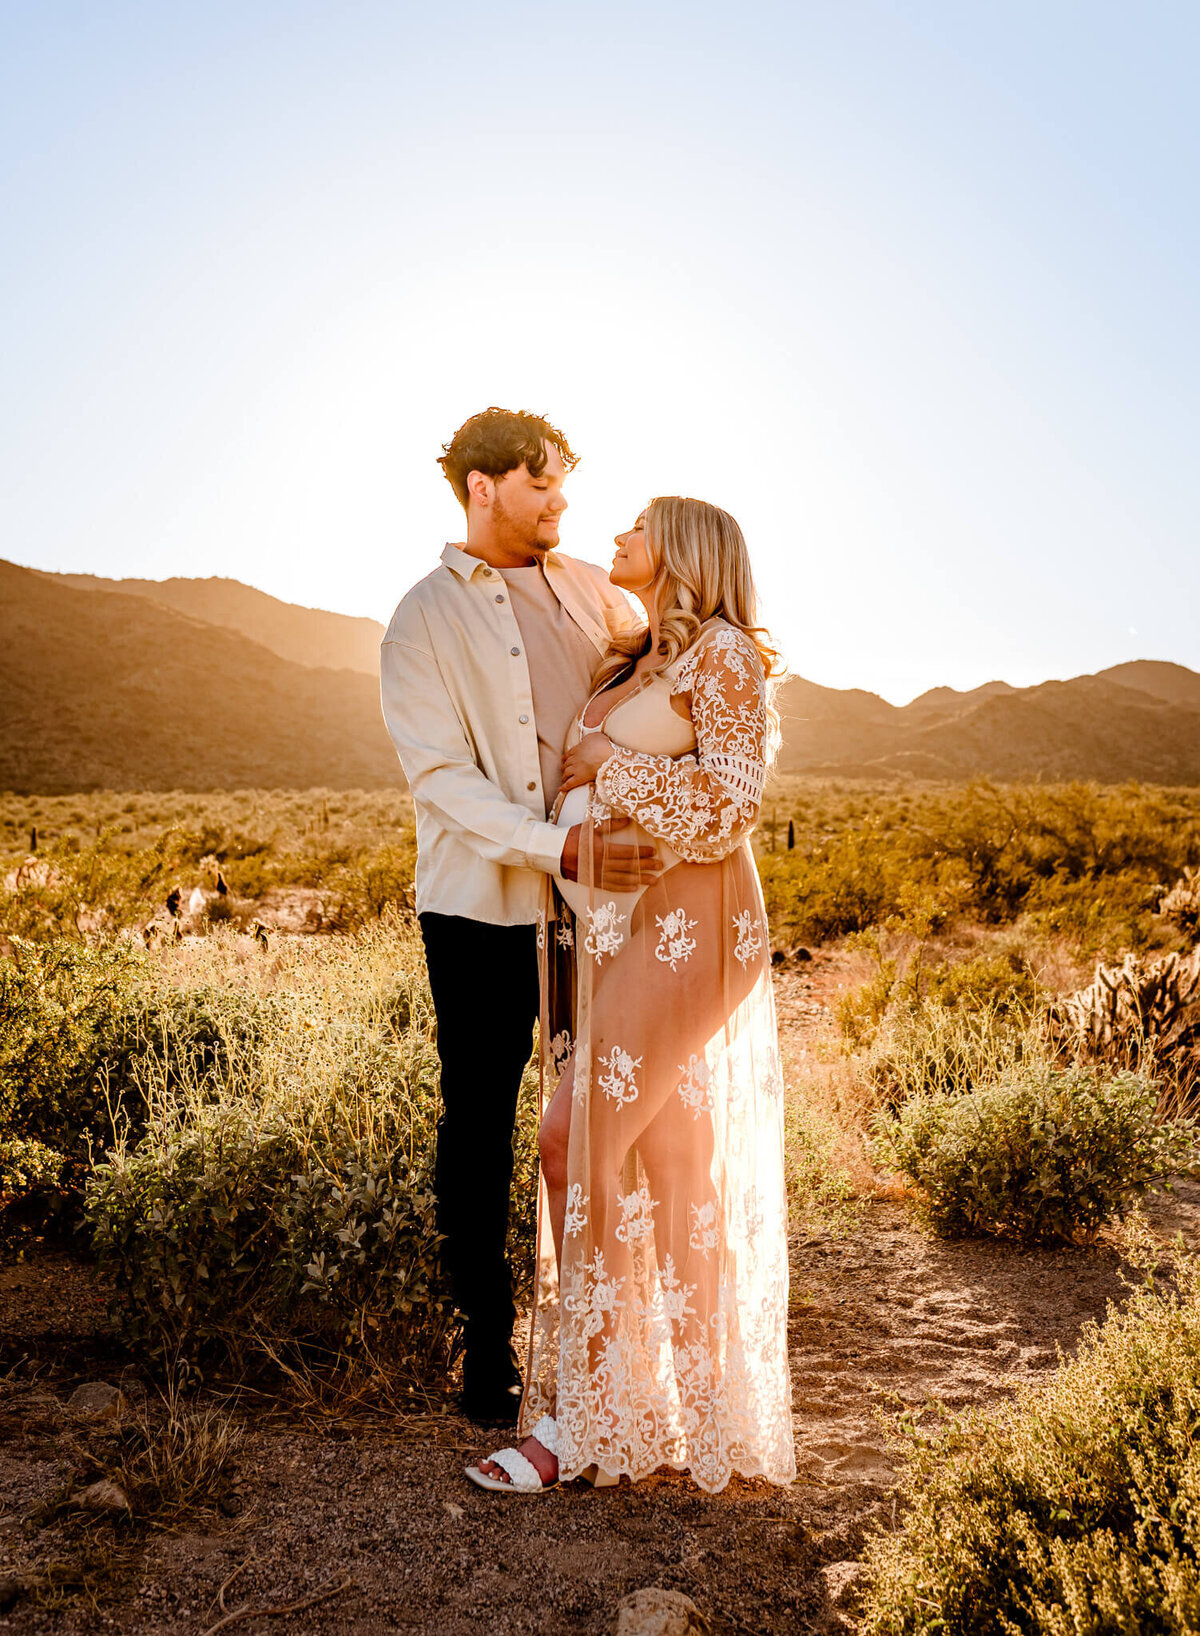 parents-to-be hugging each other during maternity photo session in Arizona